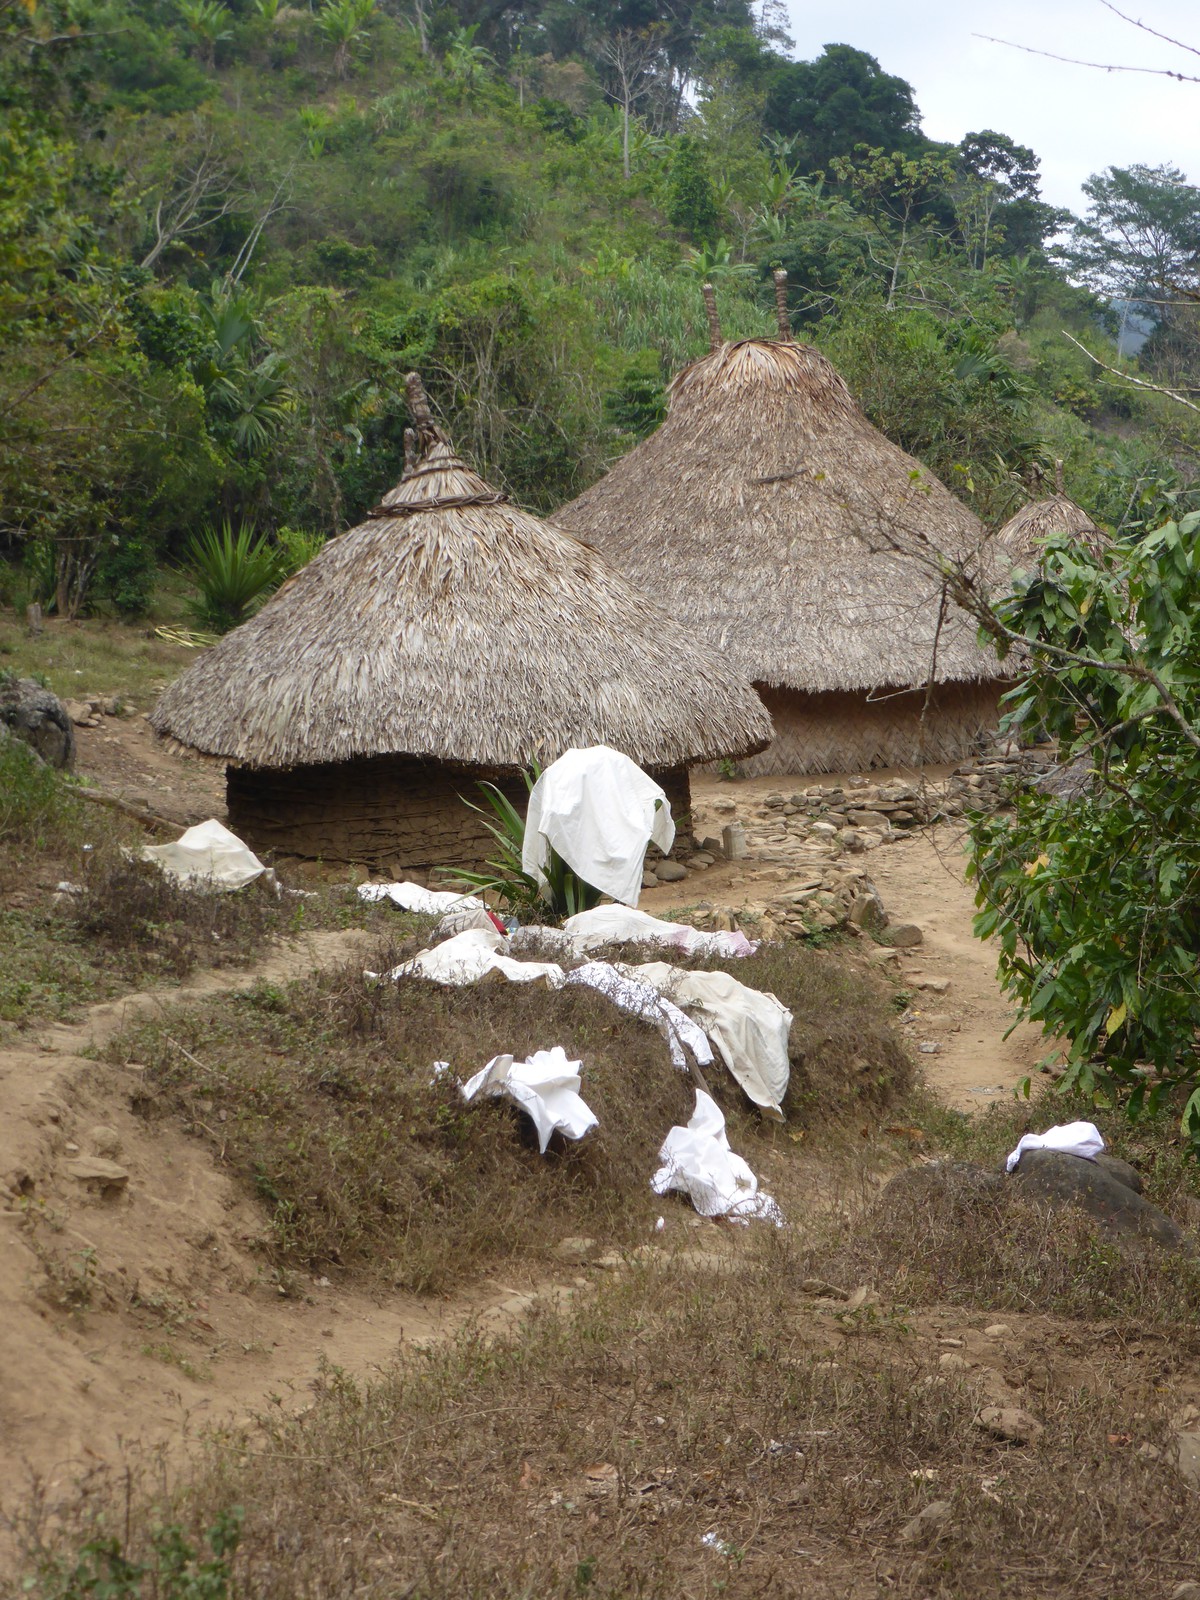 White cotton clothes drying in the Kogi village of Mutanzhi